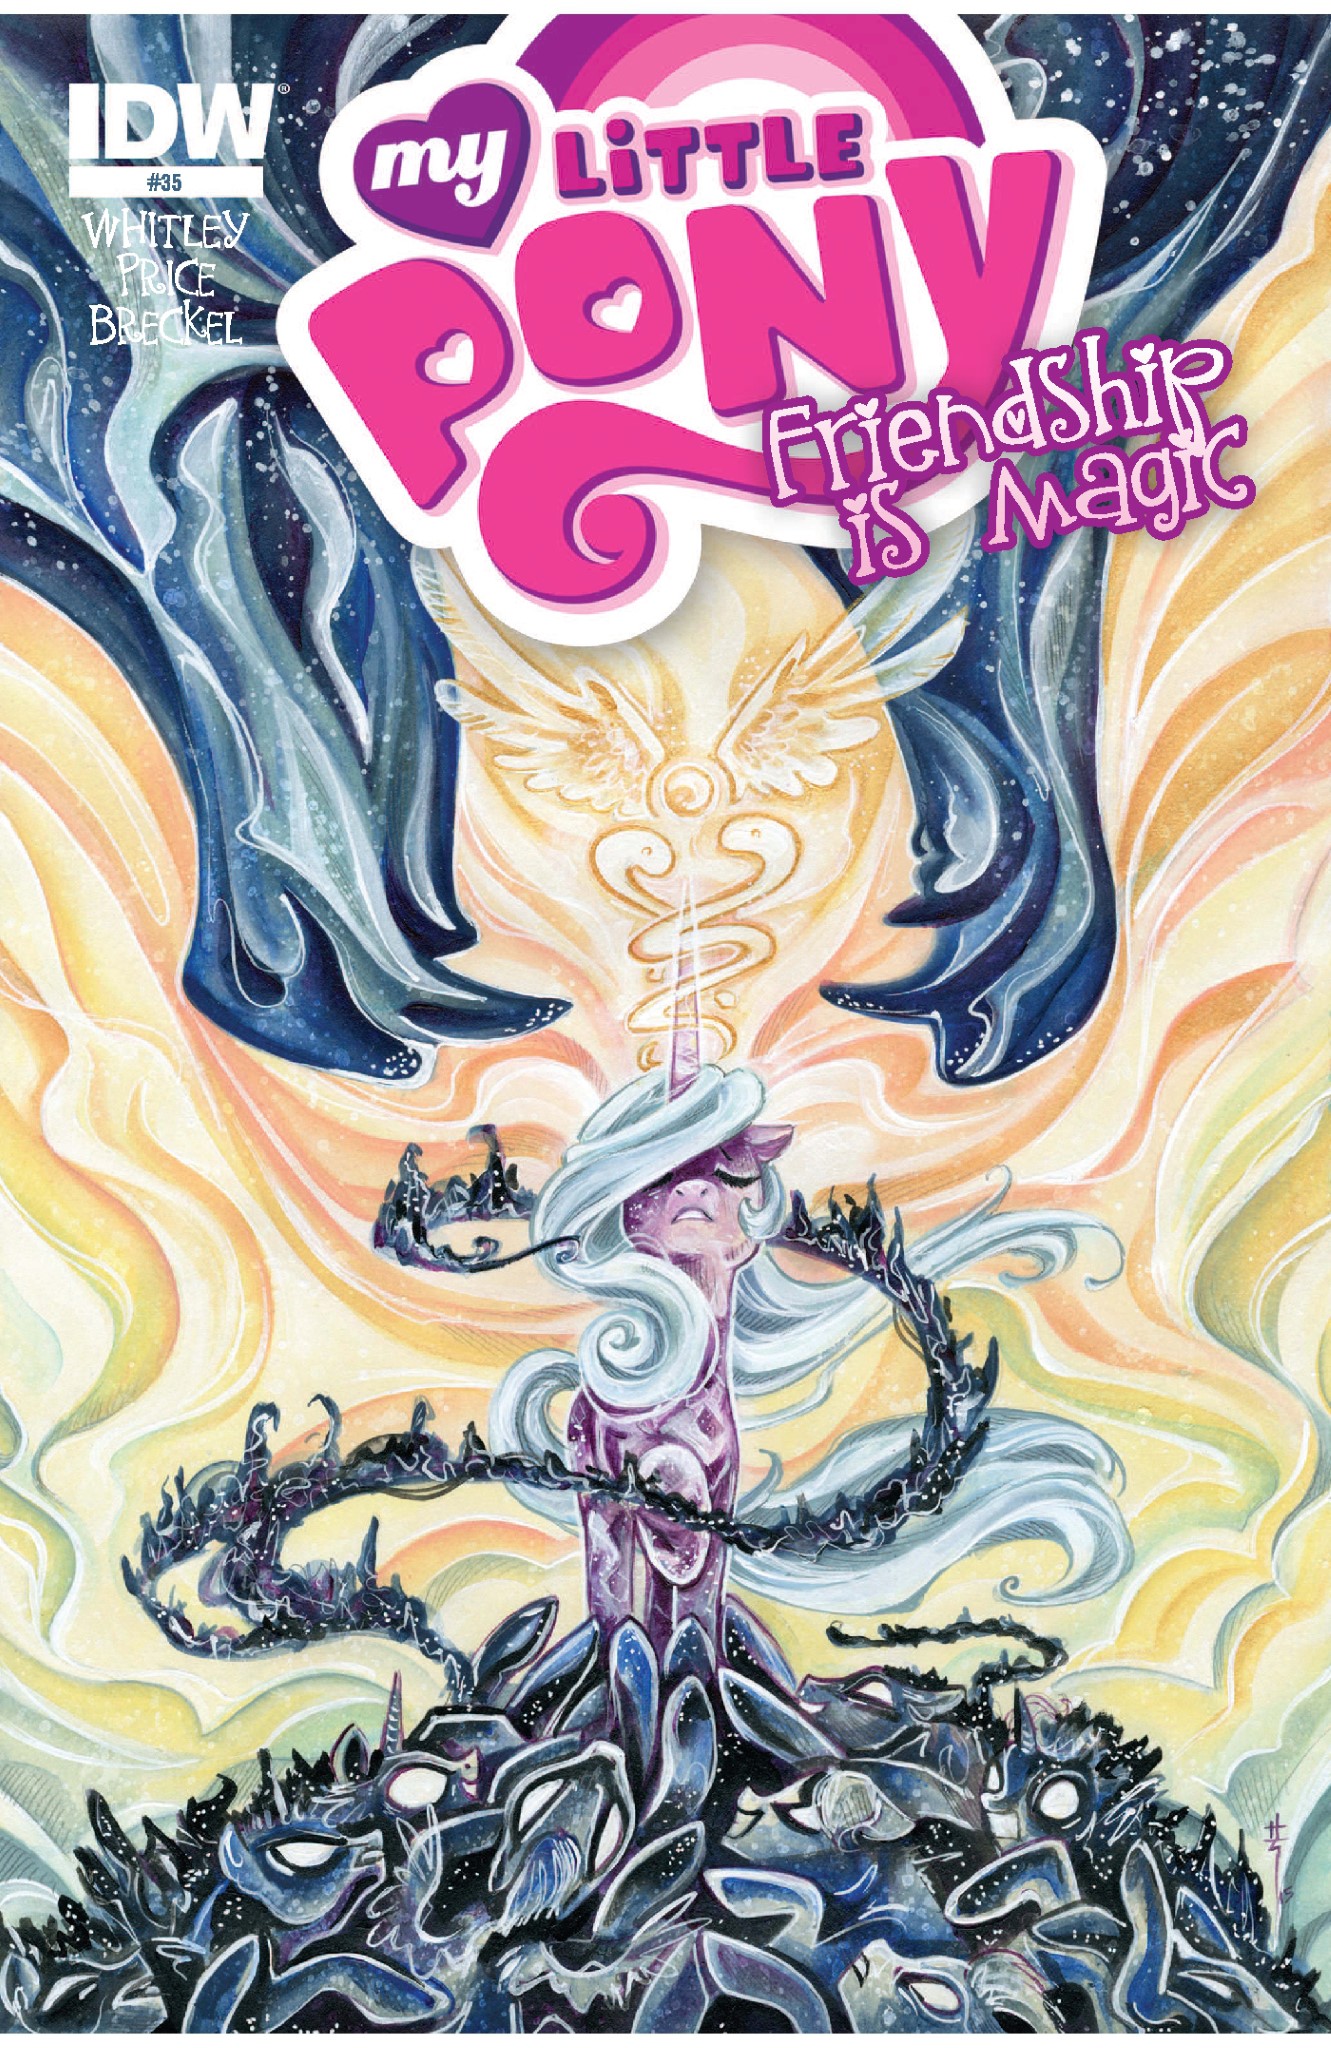 Read online My Little Pony: Friendship is Magic comic -  Issue #35 - 1